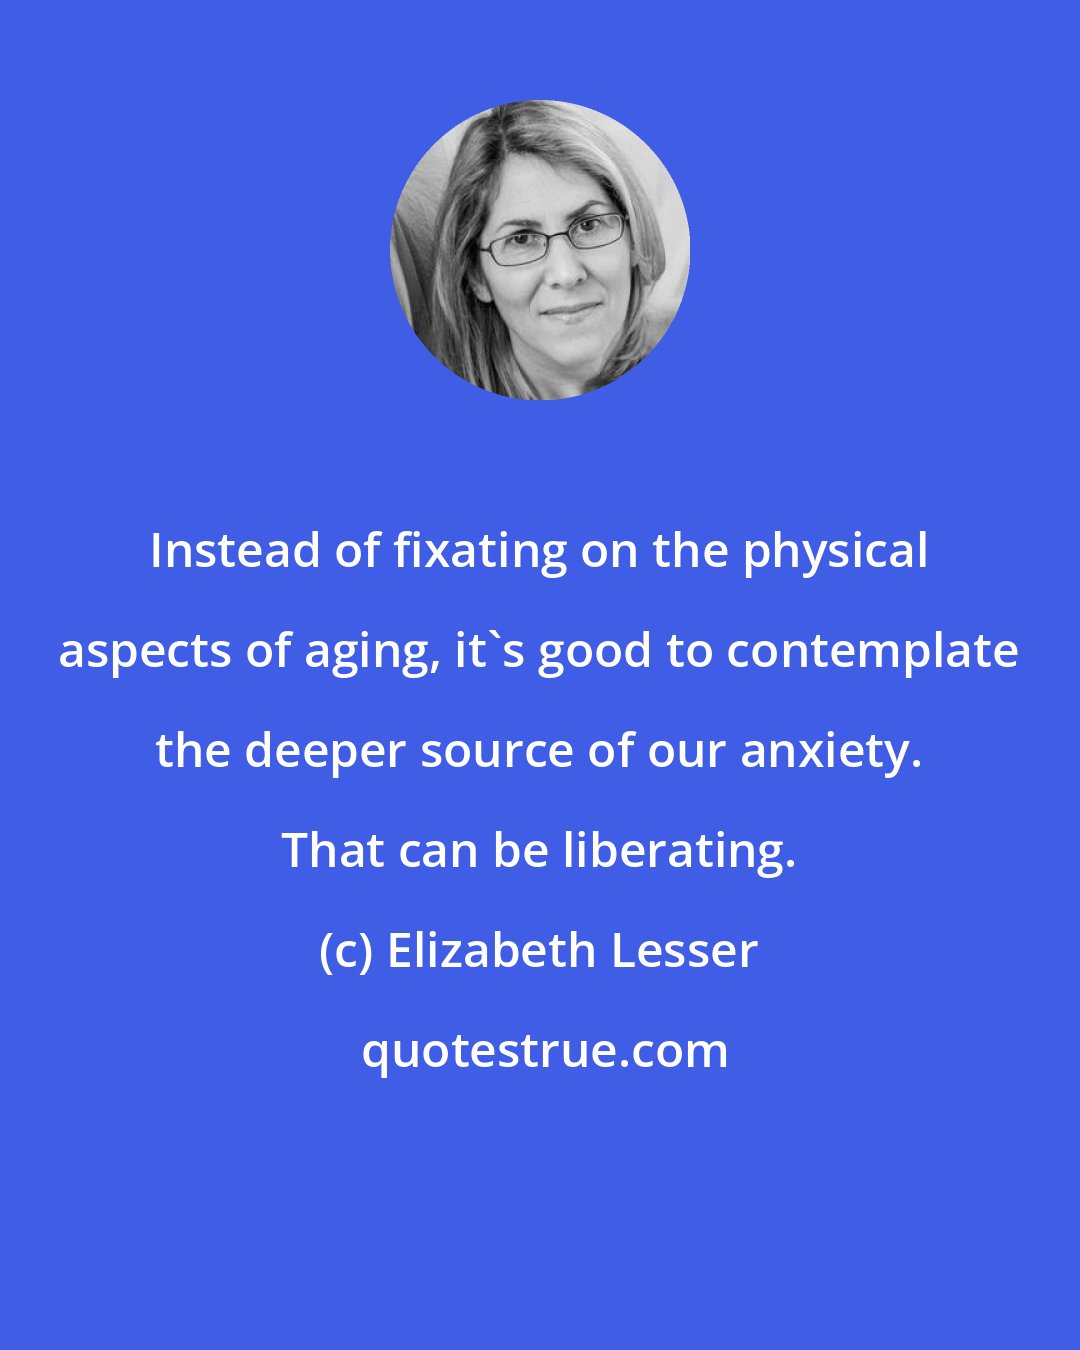 Elizabeth Lesser: Instead of fixating on the physical aspects of aging, it's good to contemplate the deeper source of our anxiety. That can be liberating.